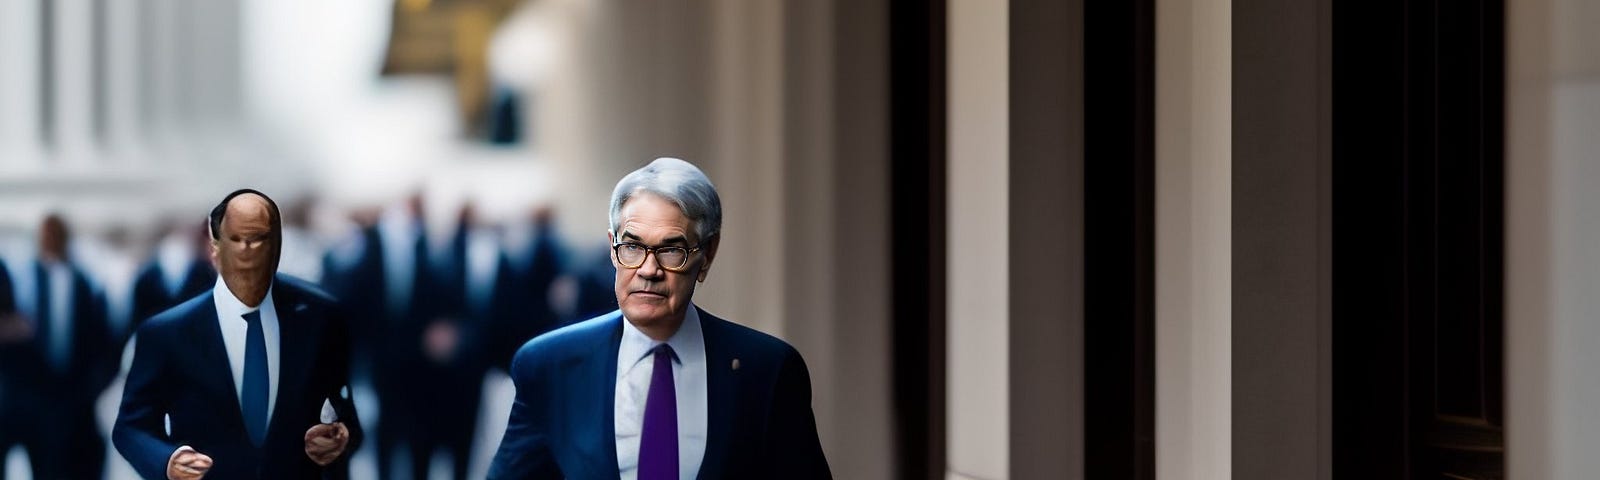 people chasing jerome powell in the new age of bank runs